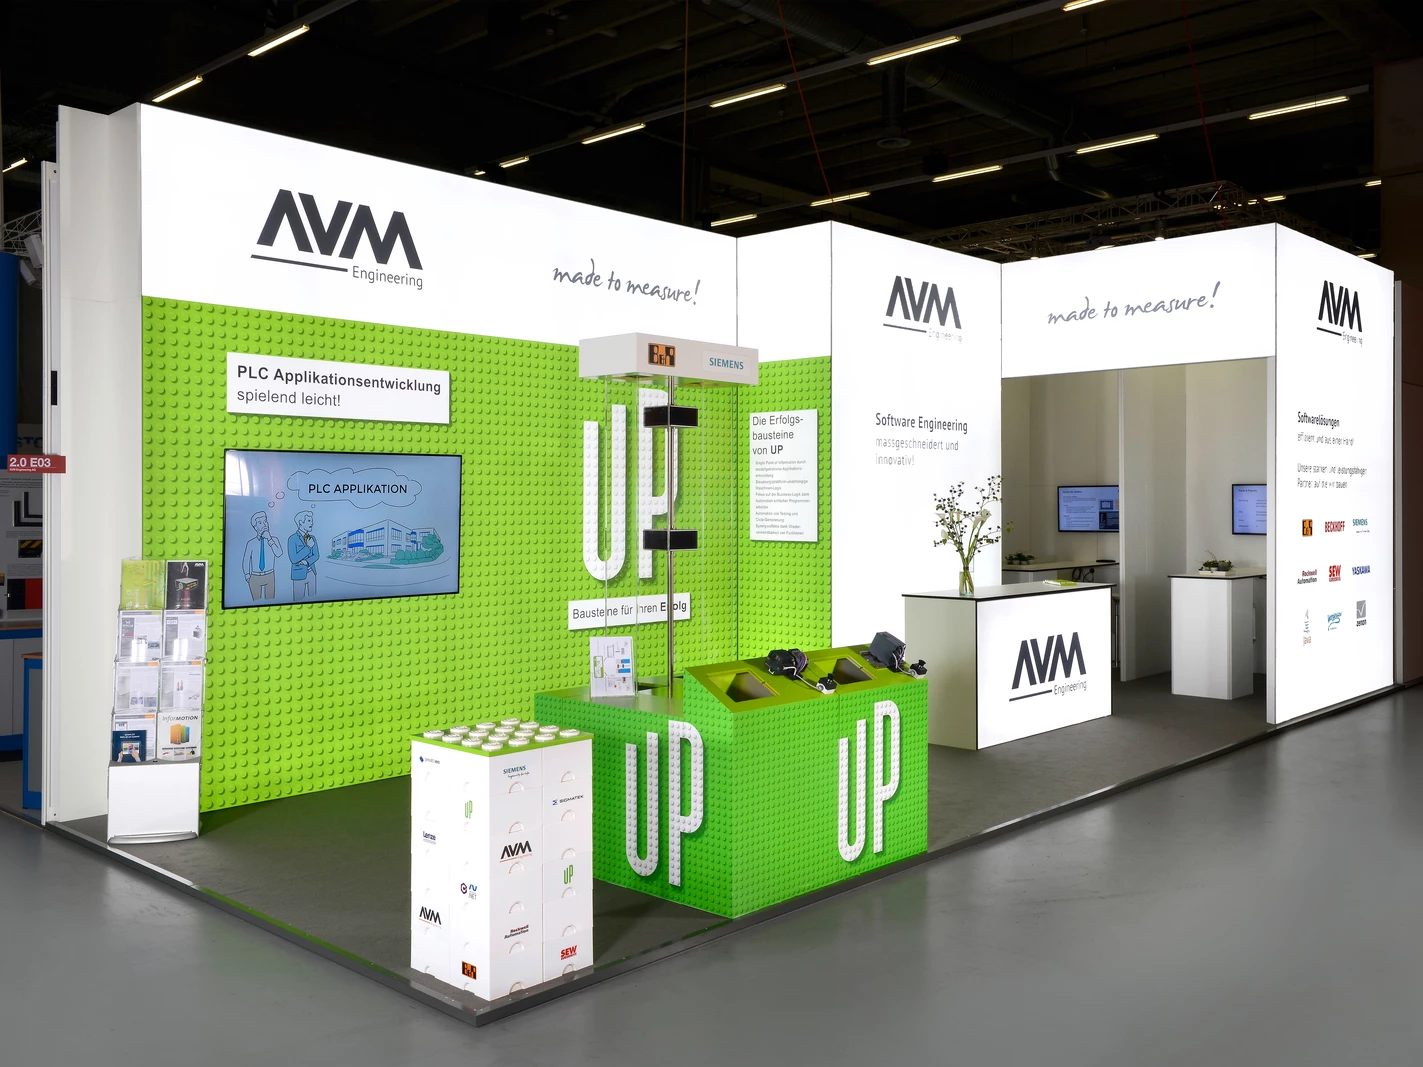 AVM Messestand by SYMA